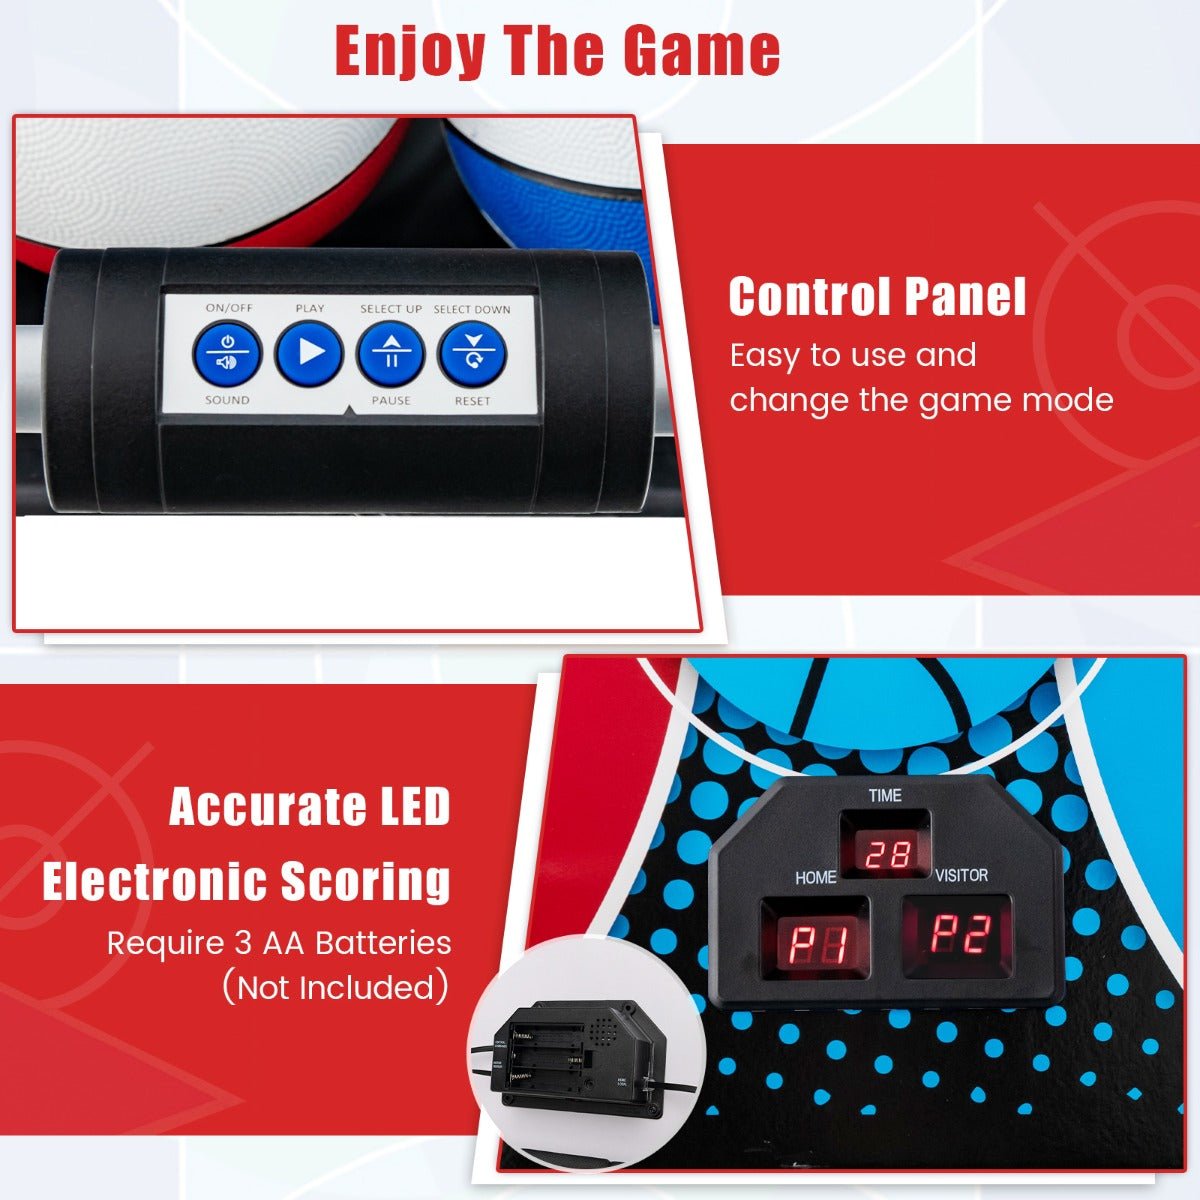 Red Hot Basketball Arcade for Players